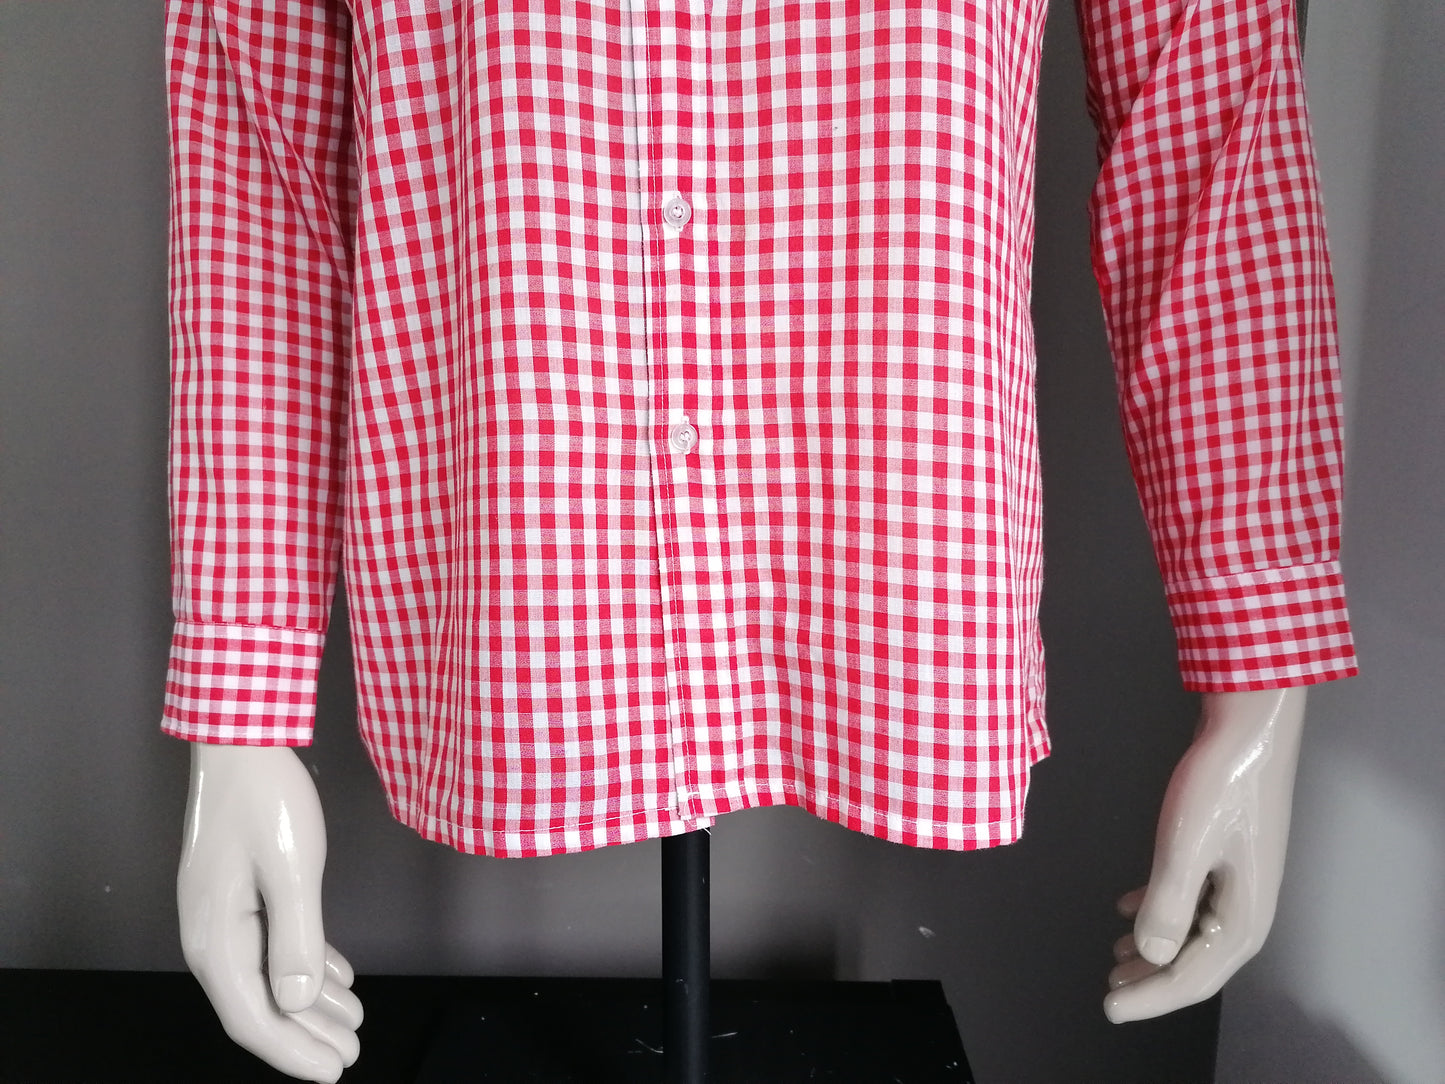 Vintage 70's shirt. Red white checkered. Size M.